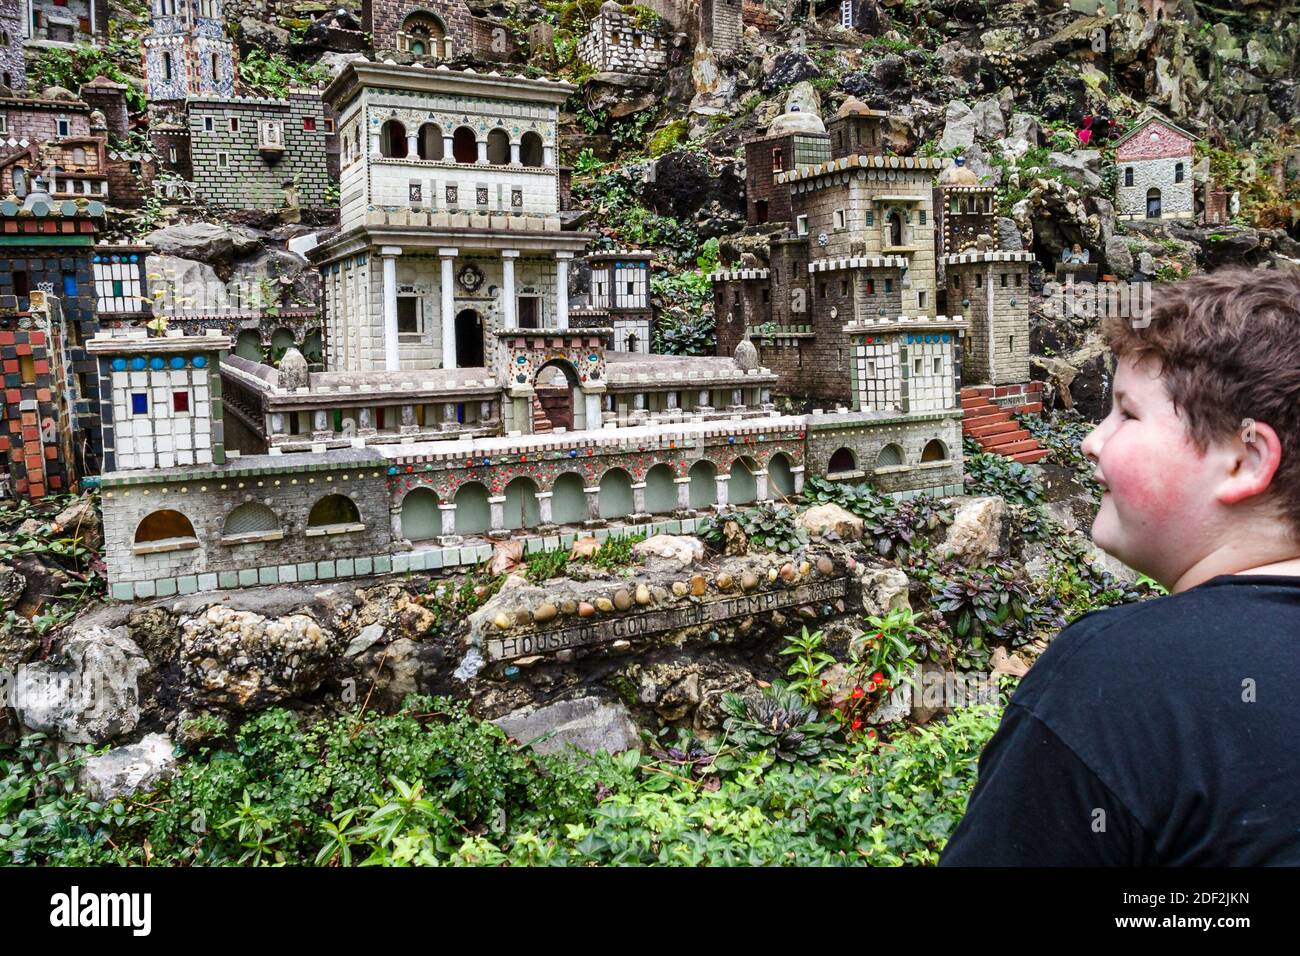 Alabama Cullman Ave Maria Grotto,miniature replicas biblical structures world famous buildings,Temple of Jerusalem boy looks looking, Stock Photo